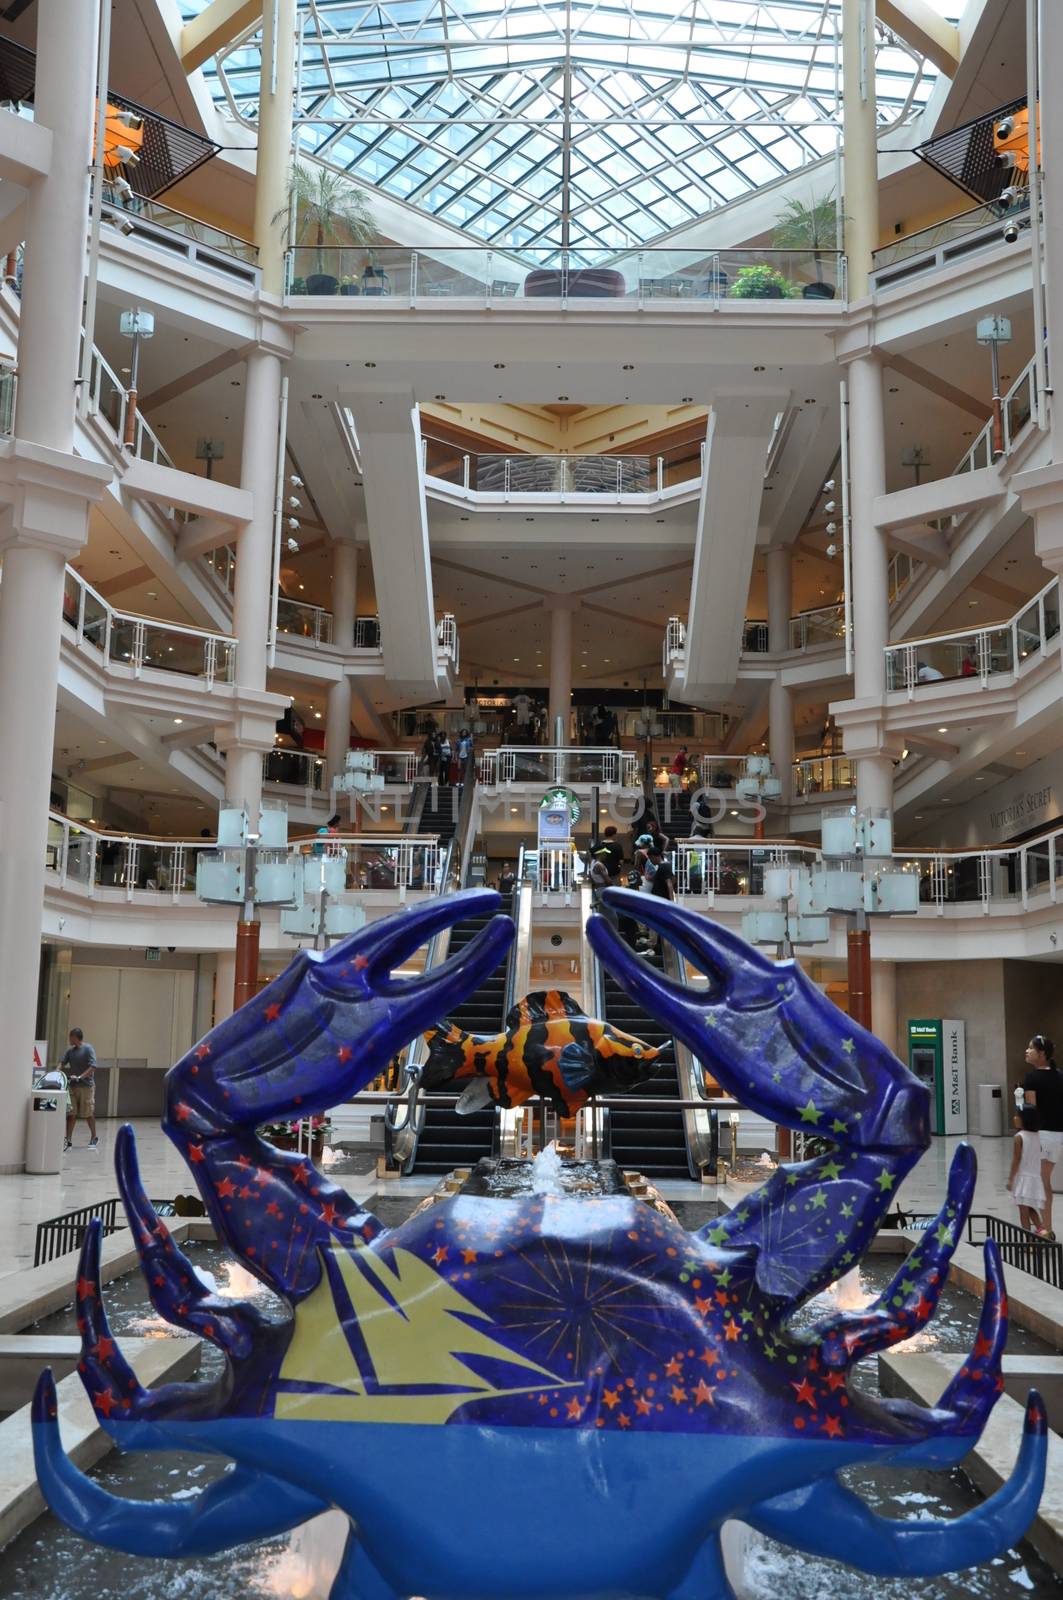 The interior of The Gallery at Harborplace in Baltimore, Maryland by sainaniritu